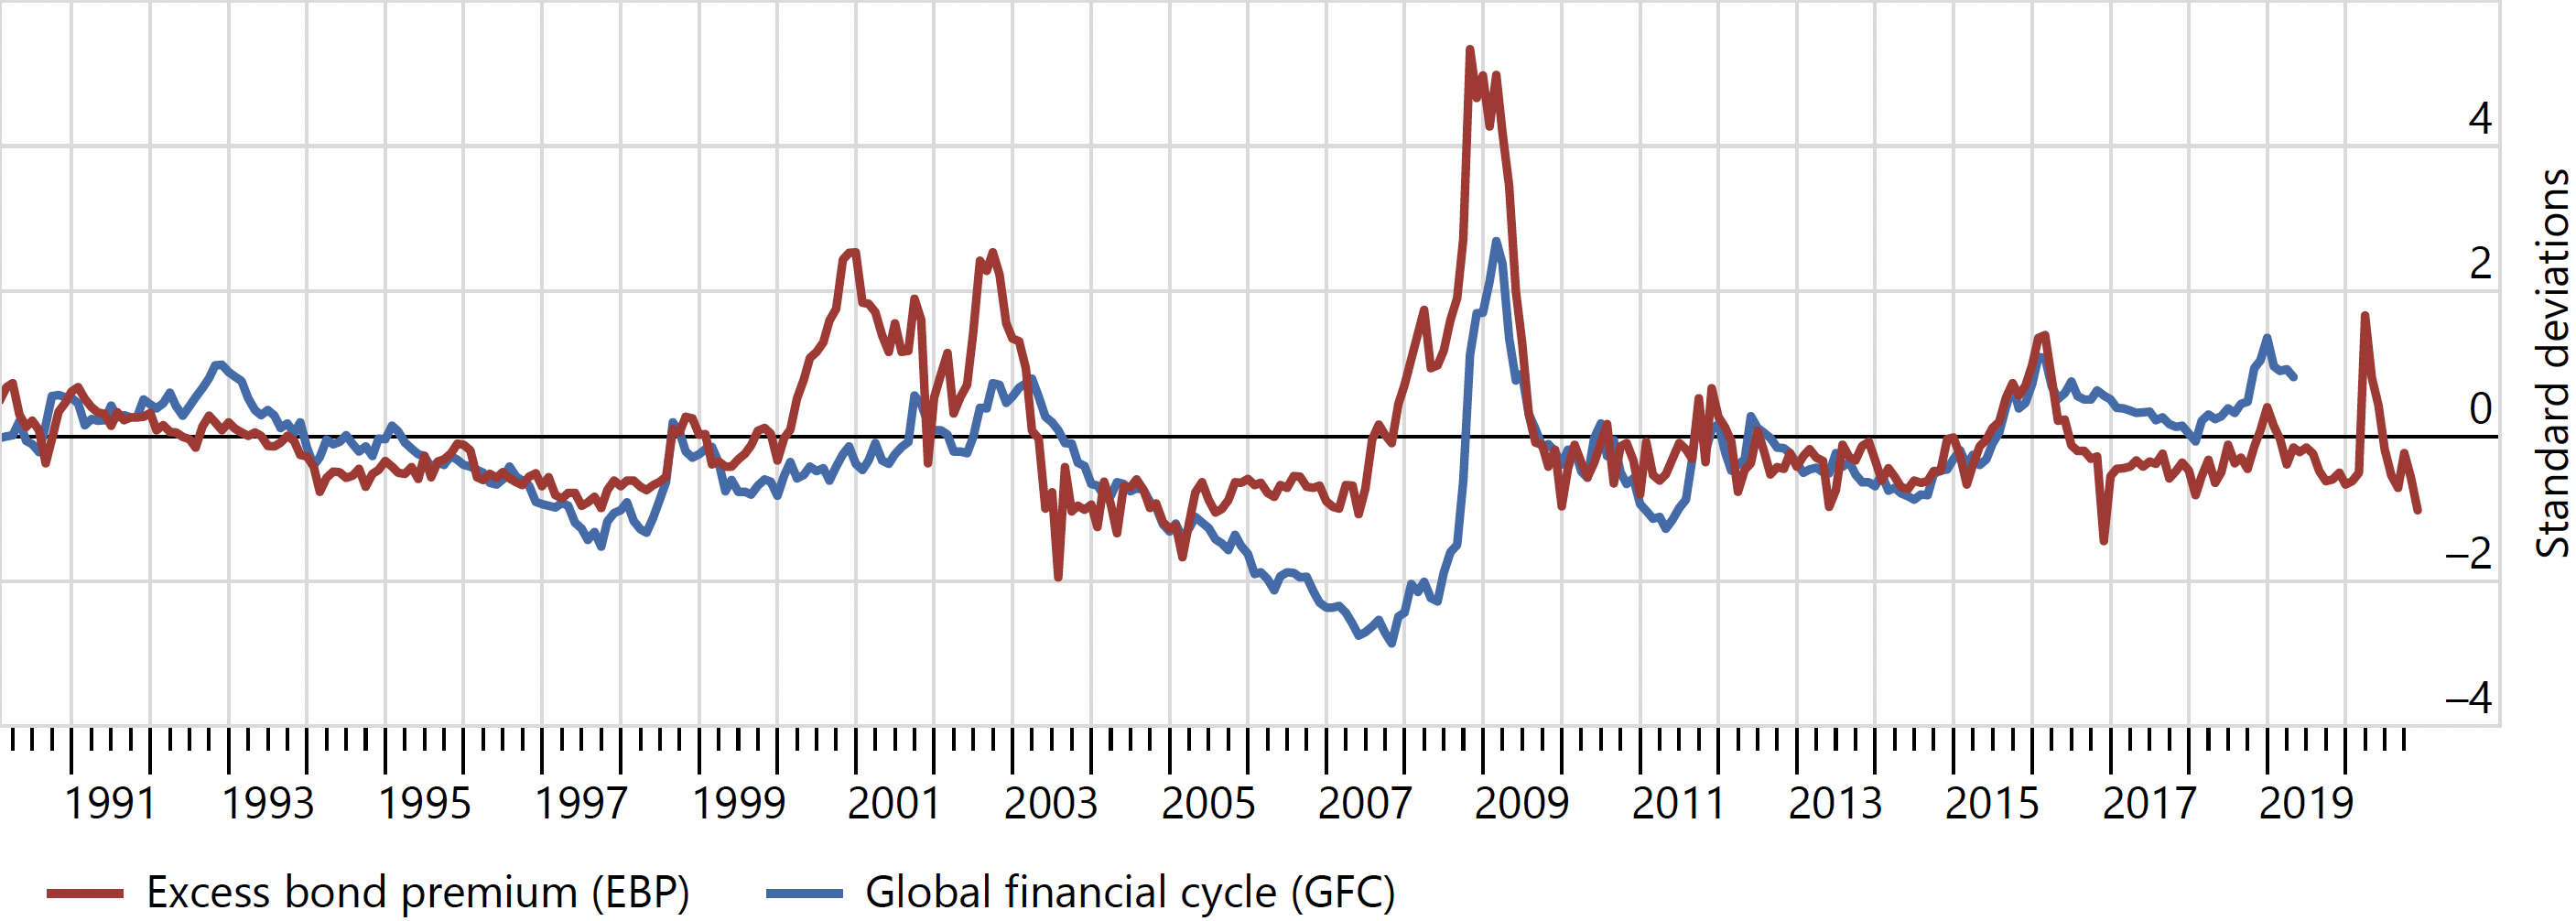 Global financial risk factors and sovereign risk 2